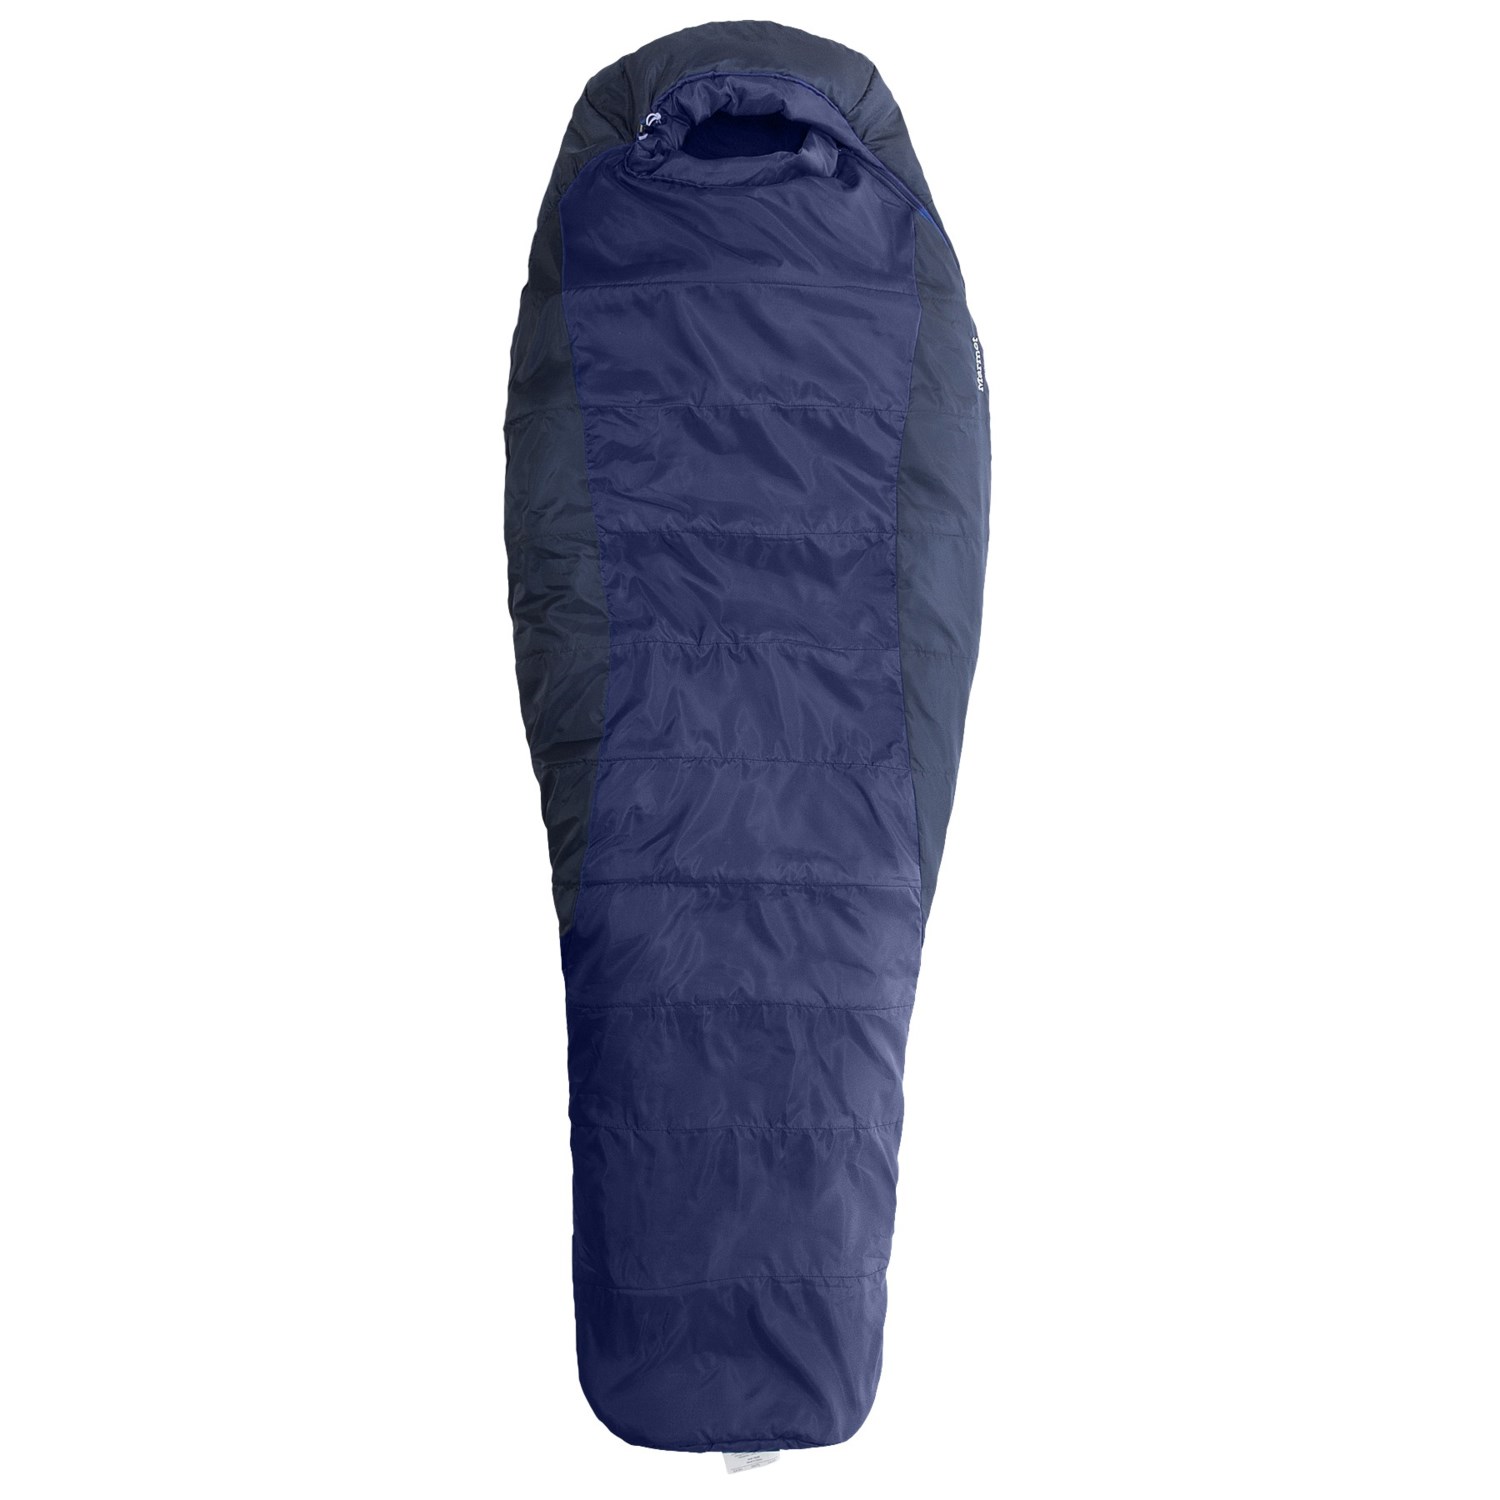 Marmot 15°F Wizard Sleeping Bag   Synthetic, Mummy in Pacifica 